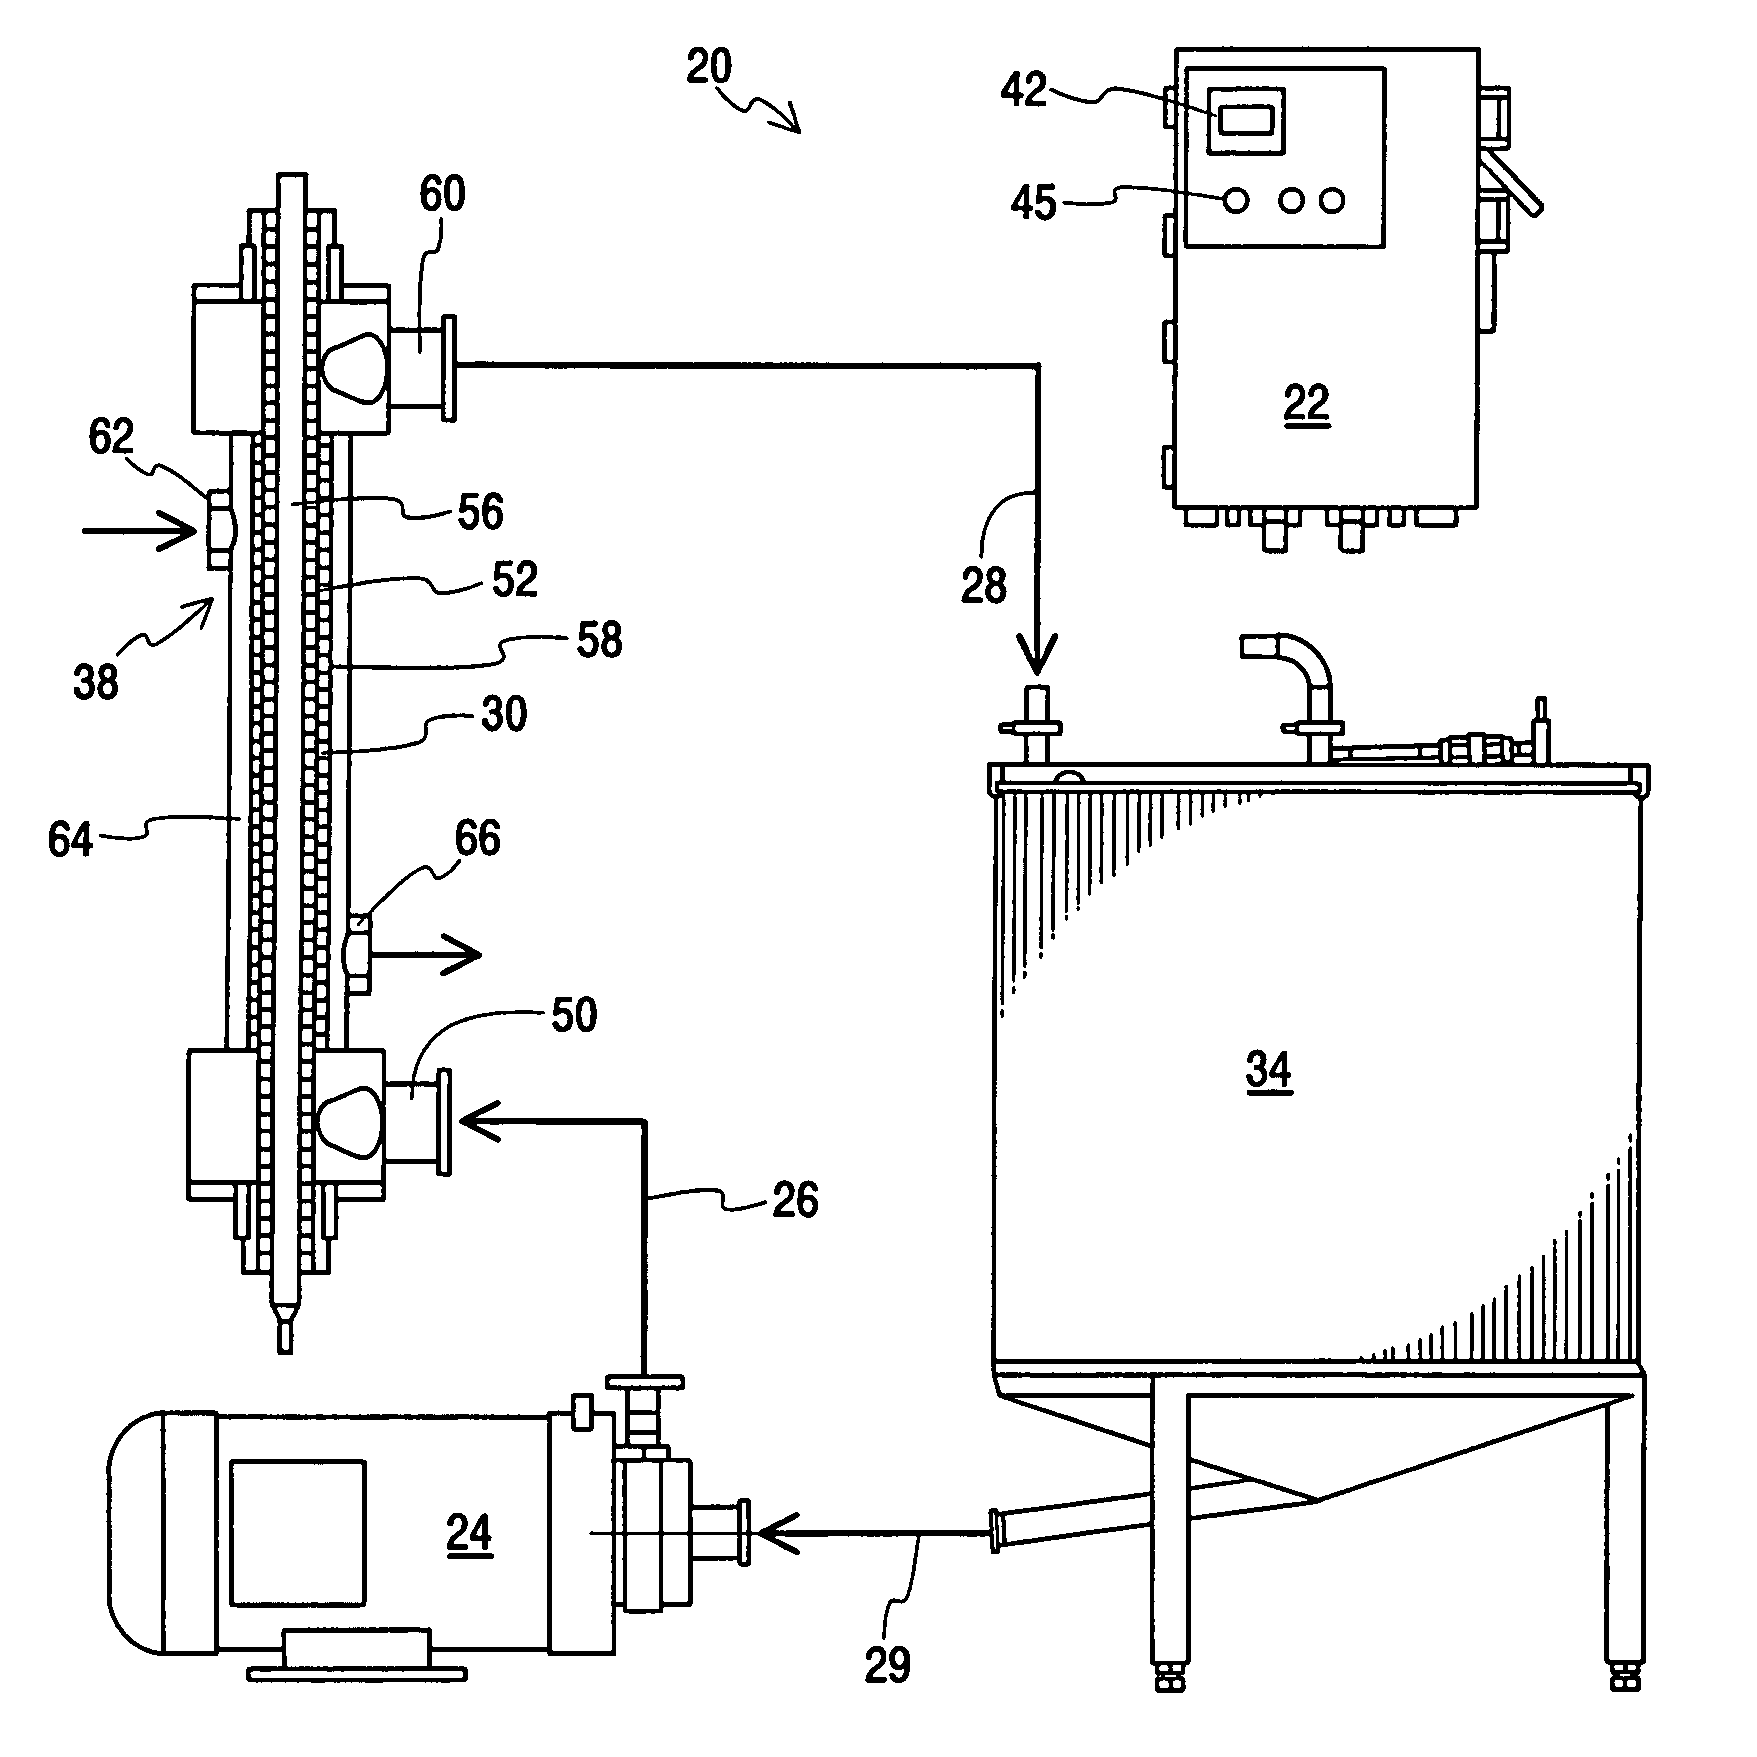 Apparatus for pasteurizing milk for feeding to calves